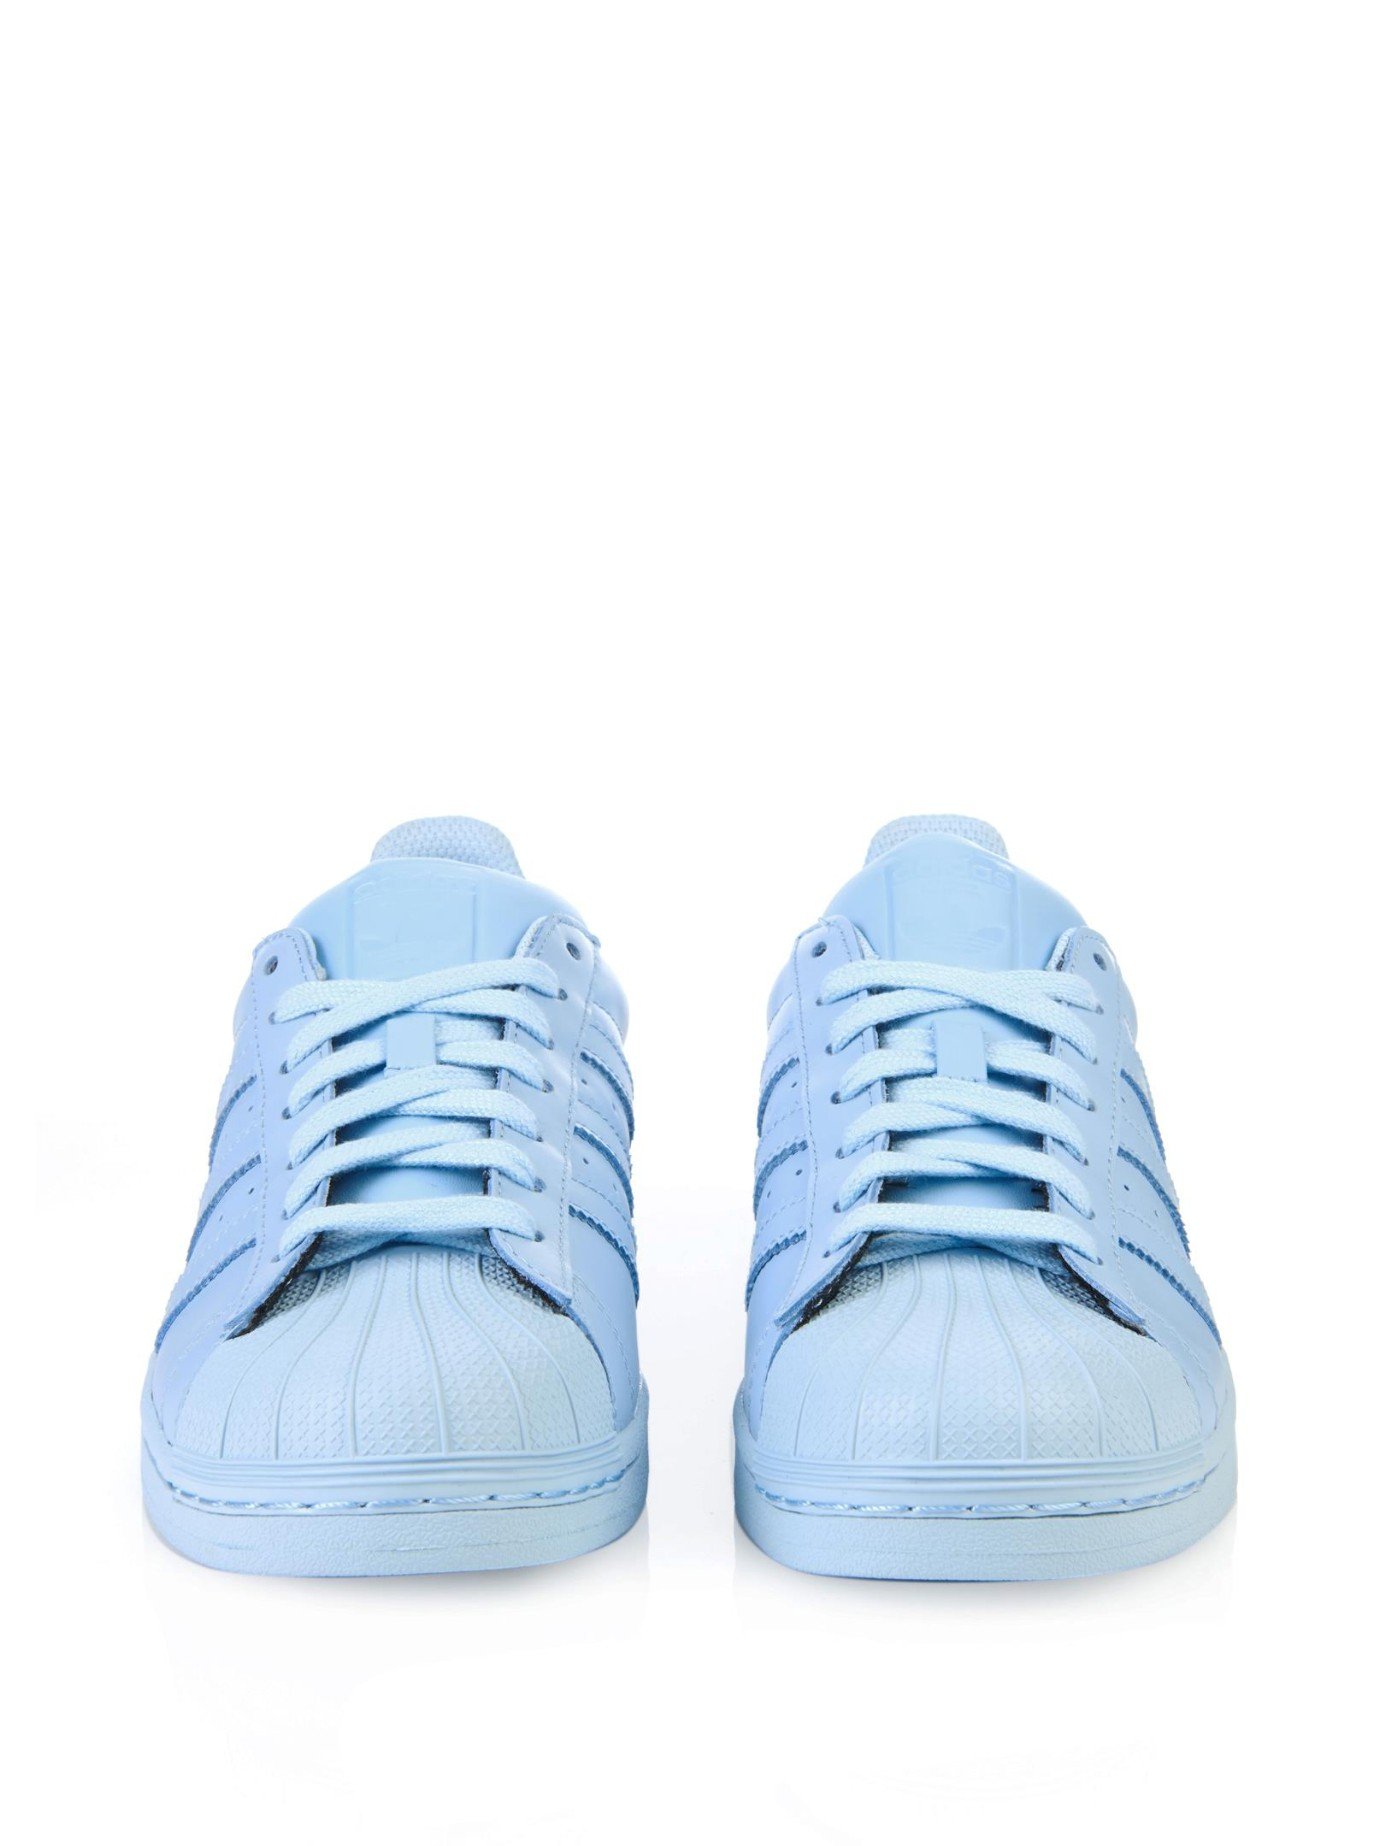 adidas Superstar Supercolor Leather Trainers in Blue Lyst